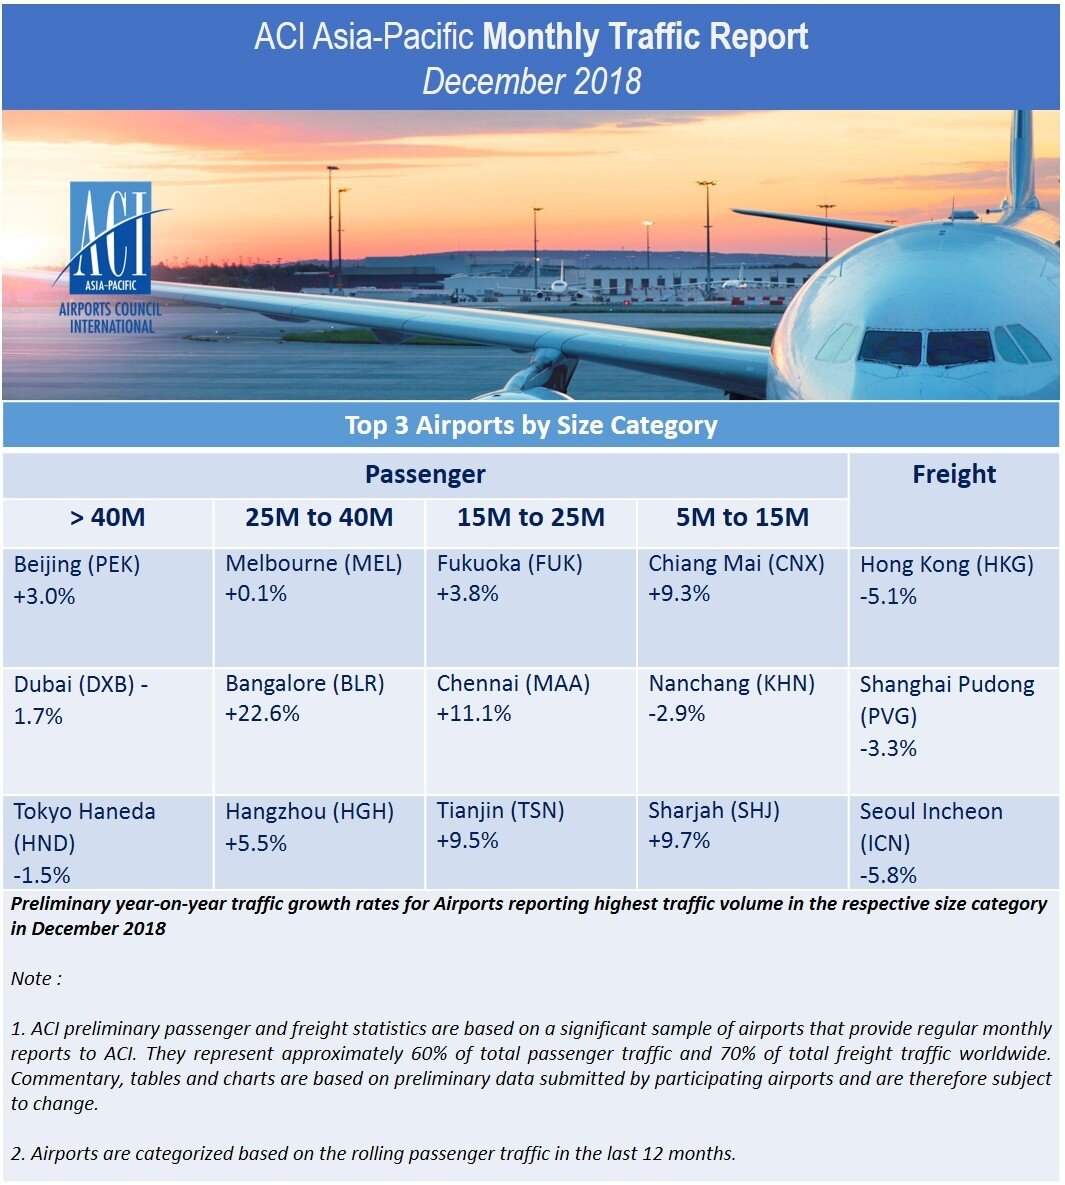 Asia-Pacific and Middle East Airports Showed Moderation in 2018